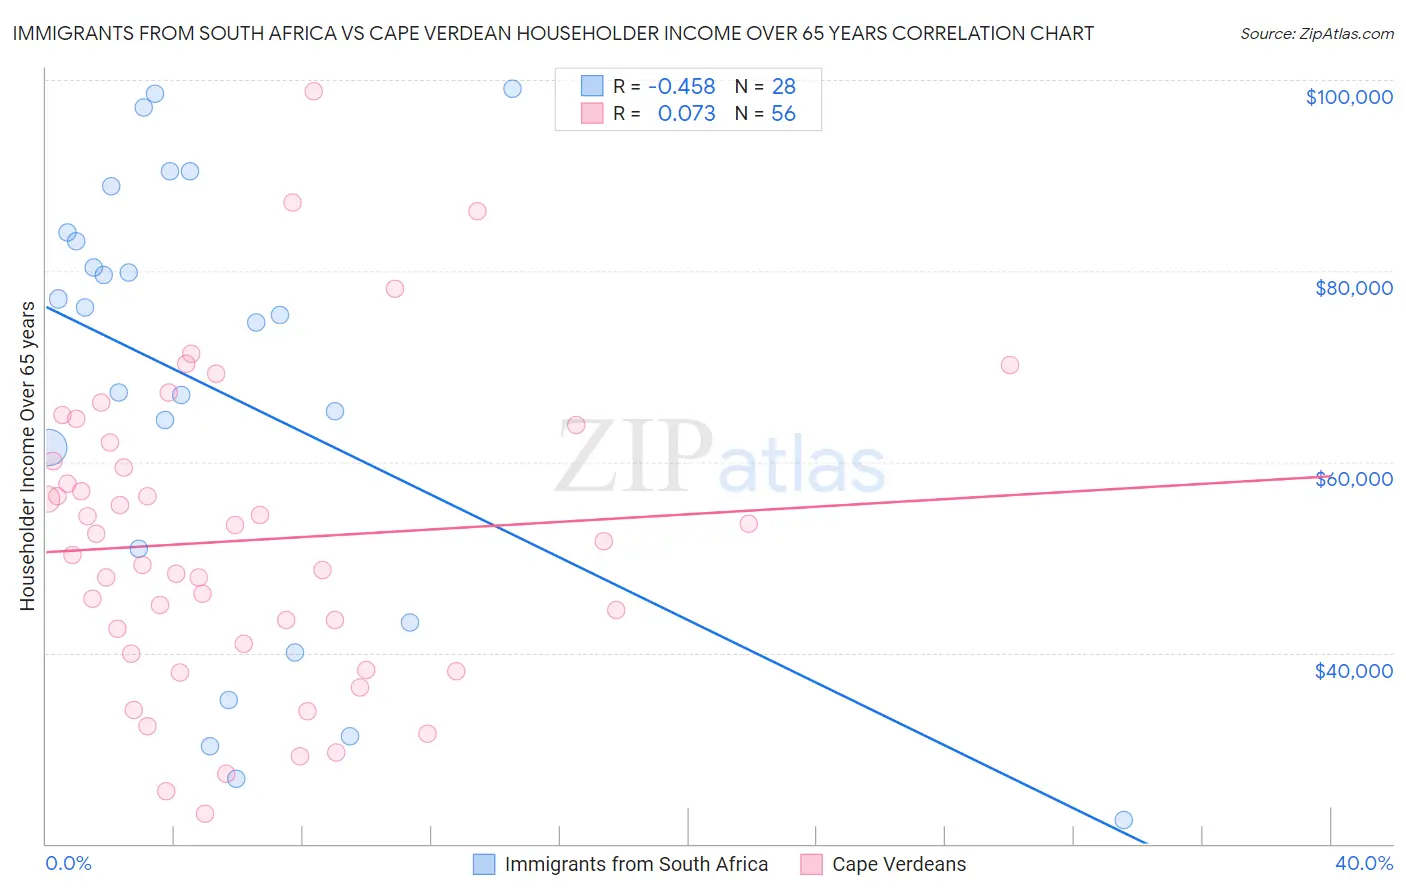 Immigrants from South Africa vs Cape Verdean Householder Income Over 65 years